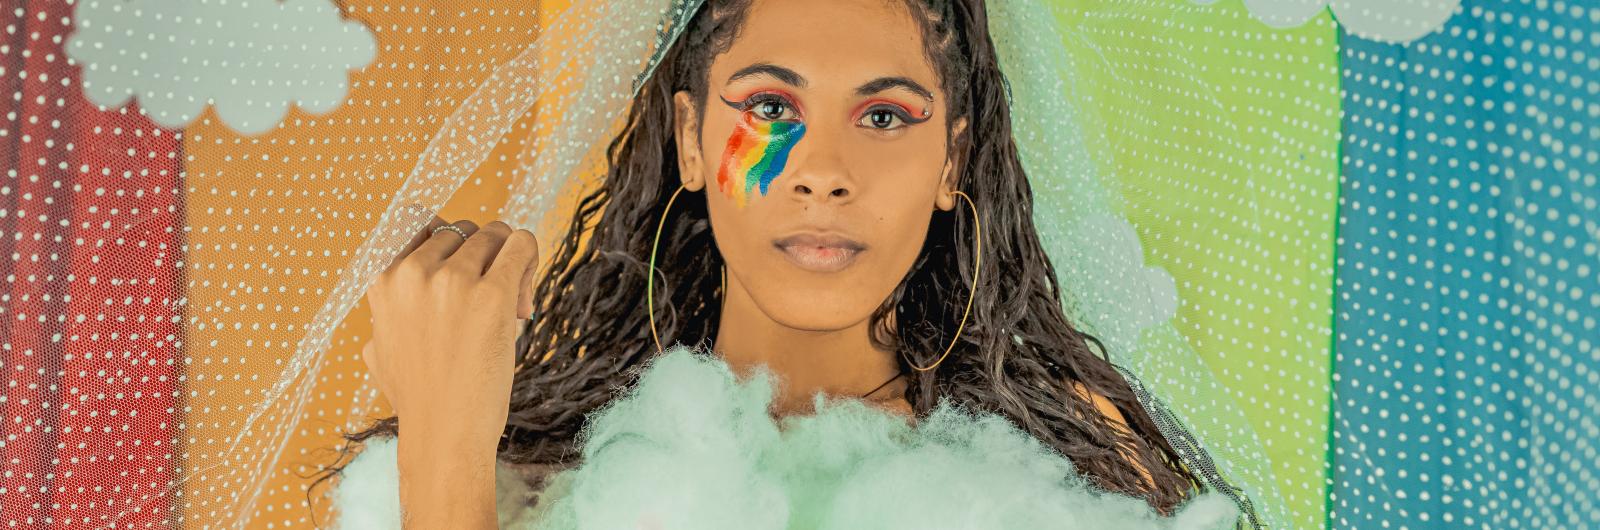 Transgender woman with a rainbow background